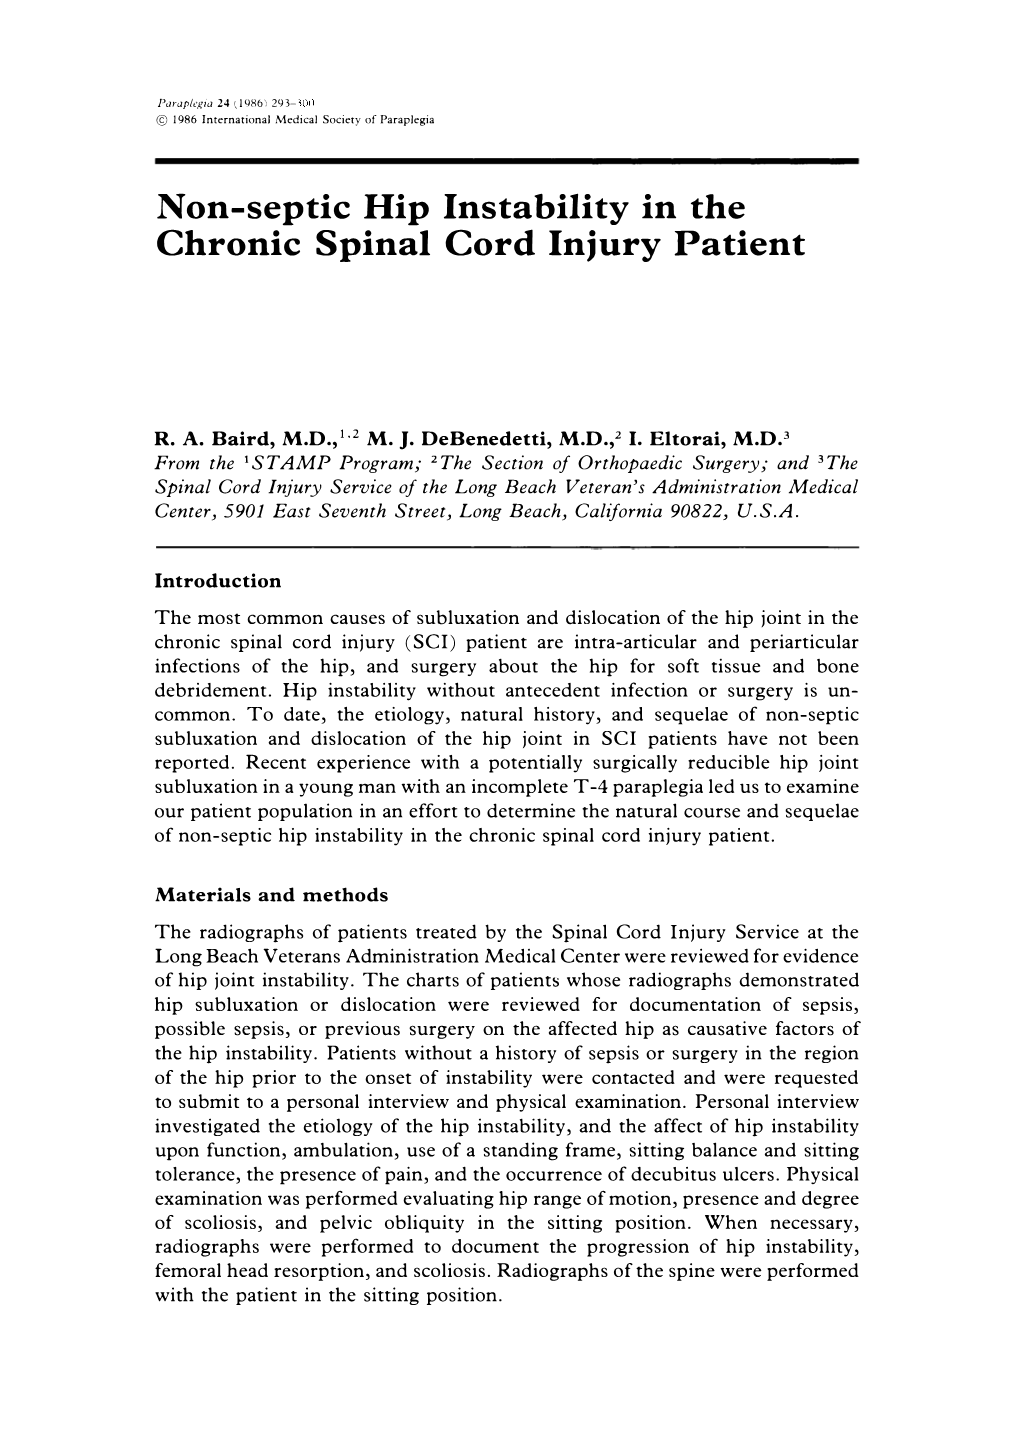 Non-Septic Hip Instability in the Chronic Spinal Cord Injury Patient